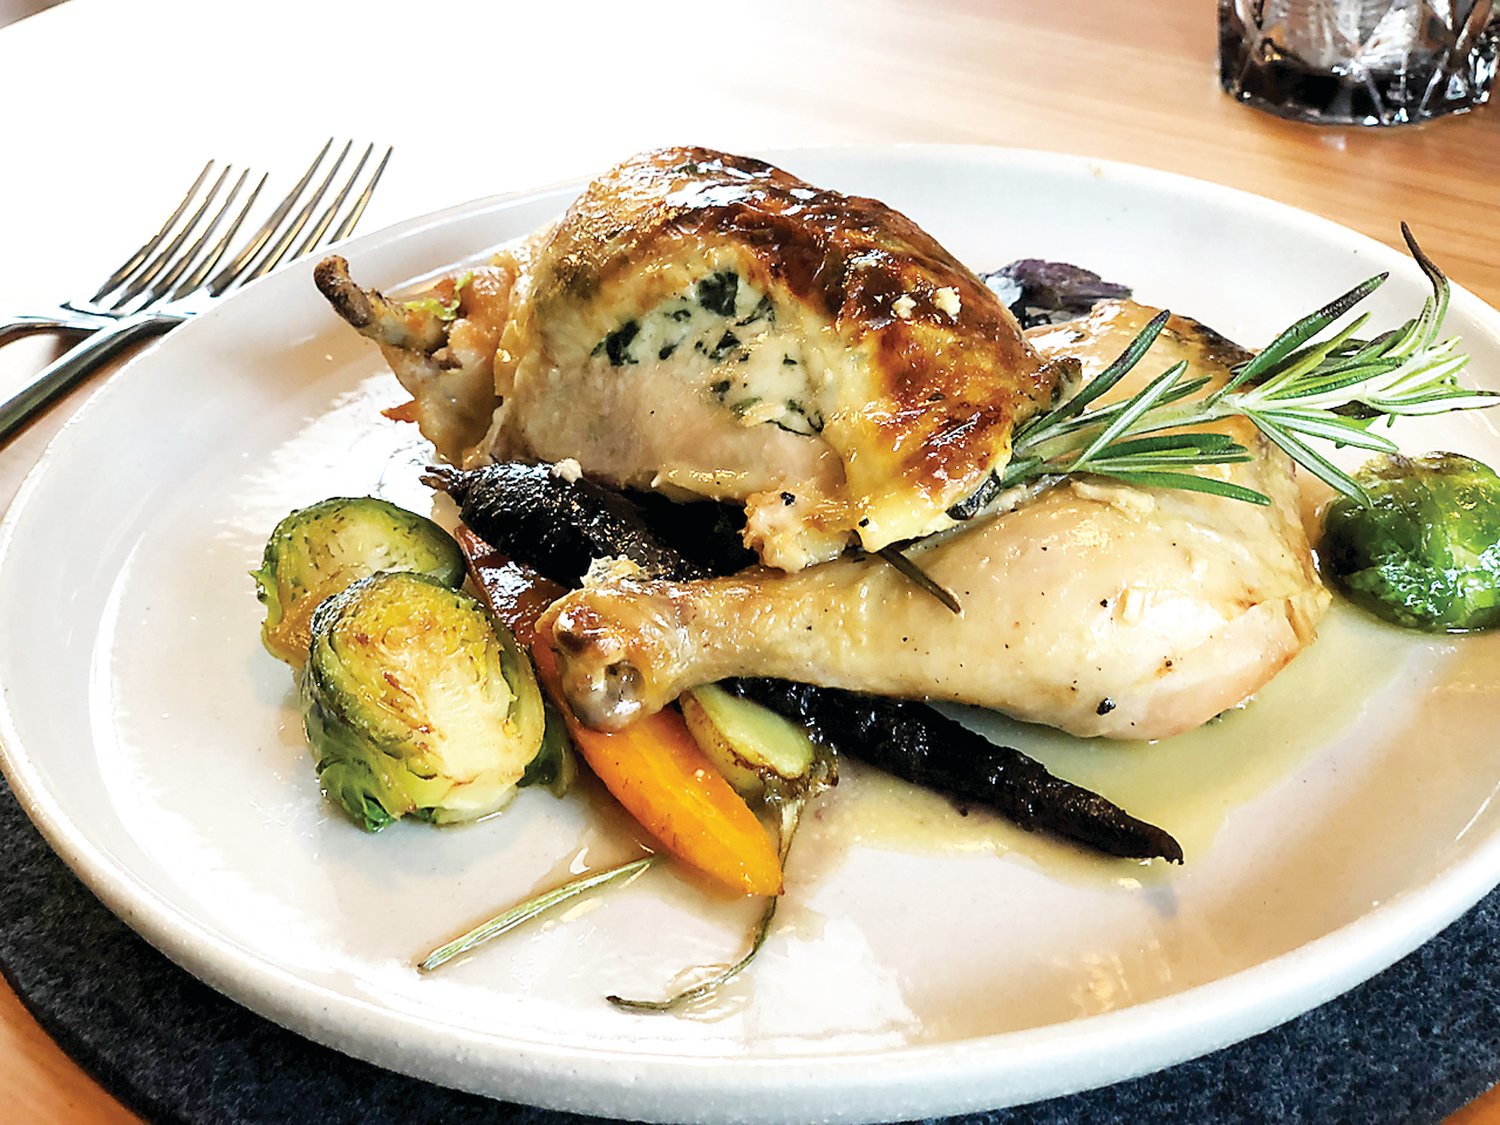 Roasted half-chicken is a popular dish at Meadowlark, New Hope’s newest casually upscale restaurant. Photograph by Meadowlark Restaurant